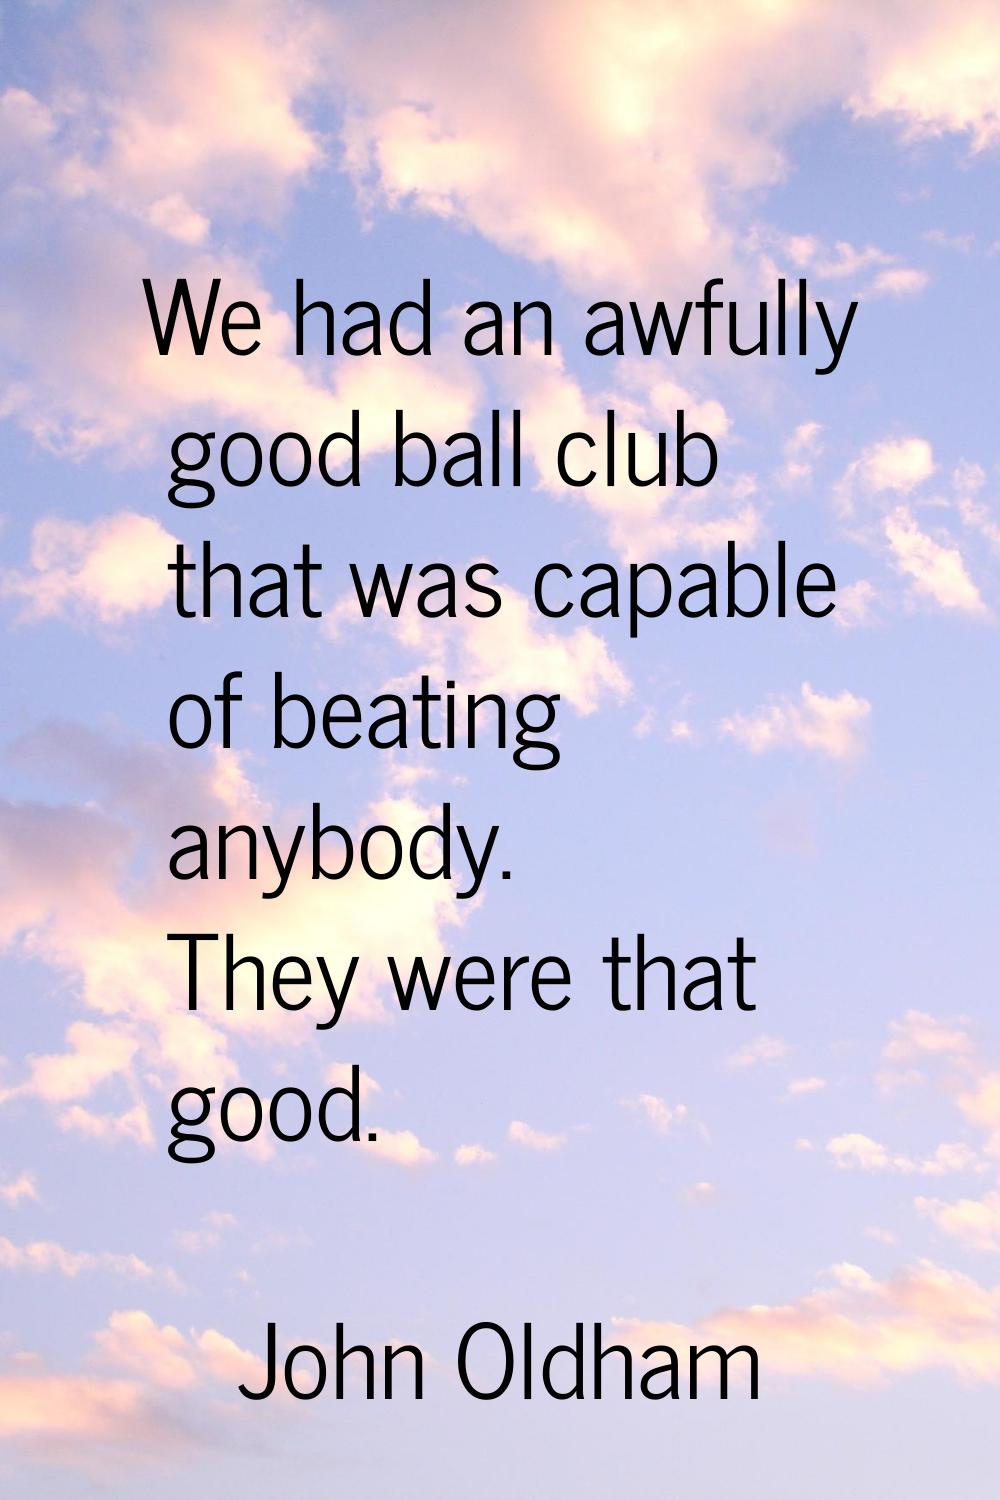 We had an awfully good ball club that was capable of beating anybody. They were that good.